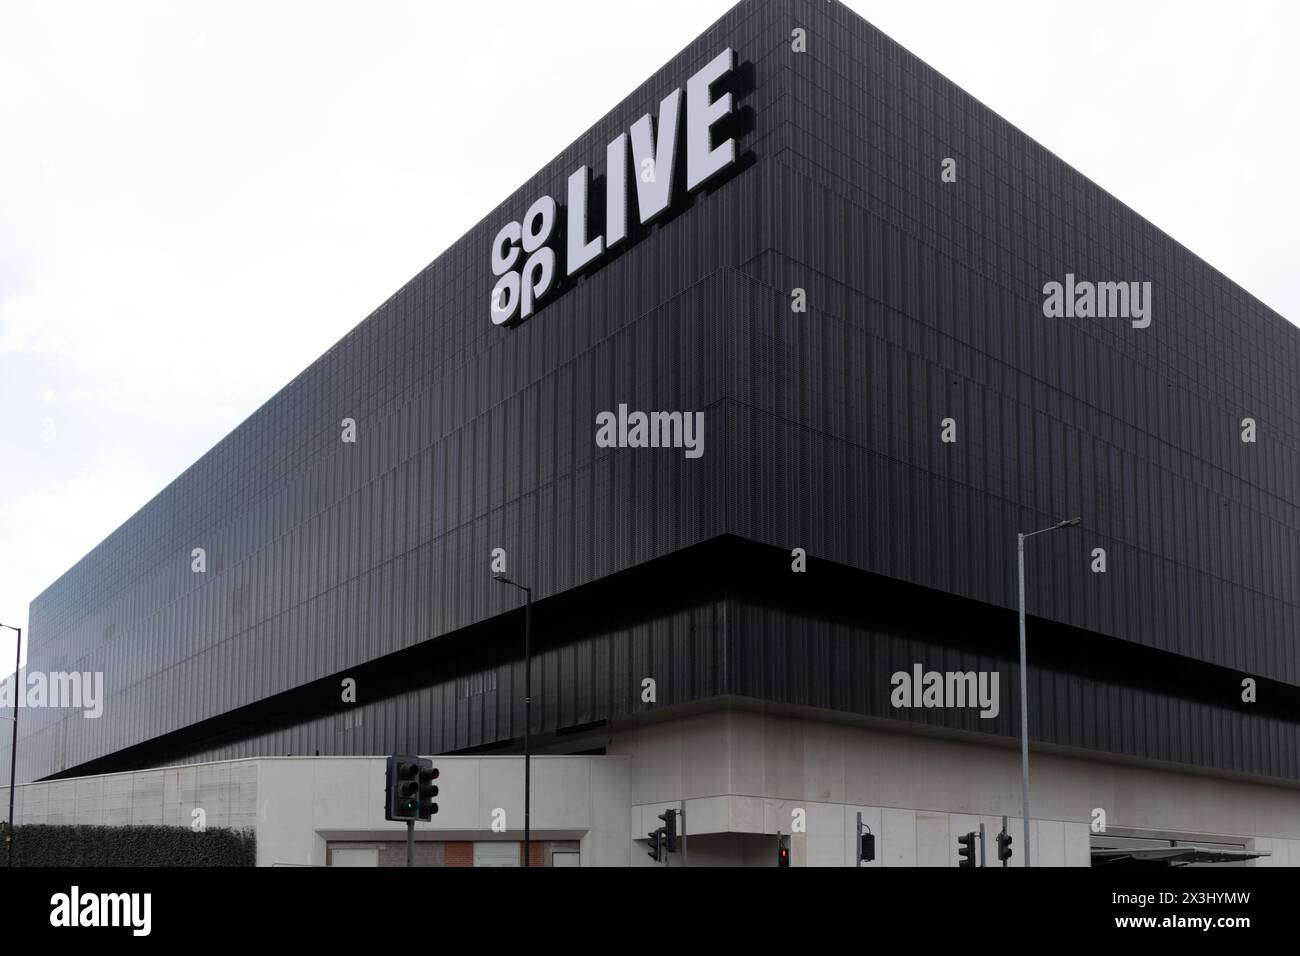 Co-op live arena at the Etihad Campus, Manchester UK. Rhombus shape music venue. Stock Photo